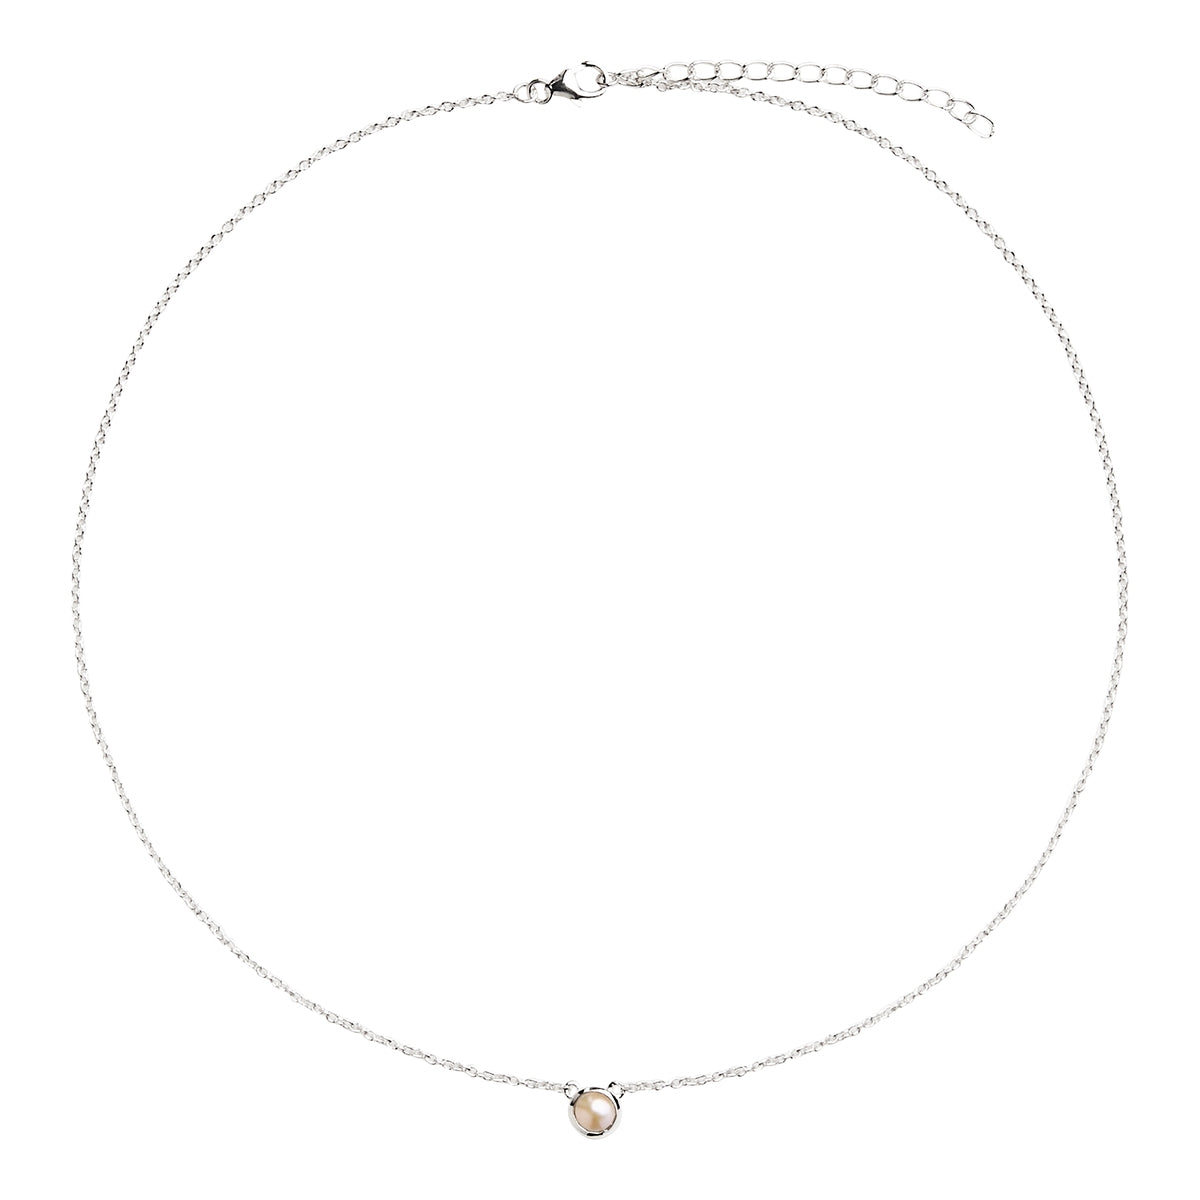 Heavenly Silver Pearl Necklace